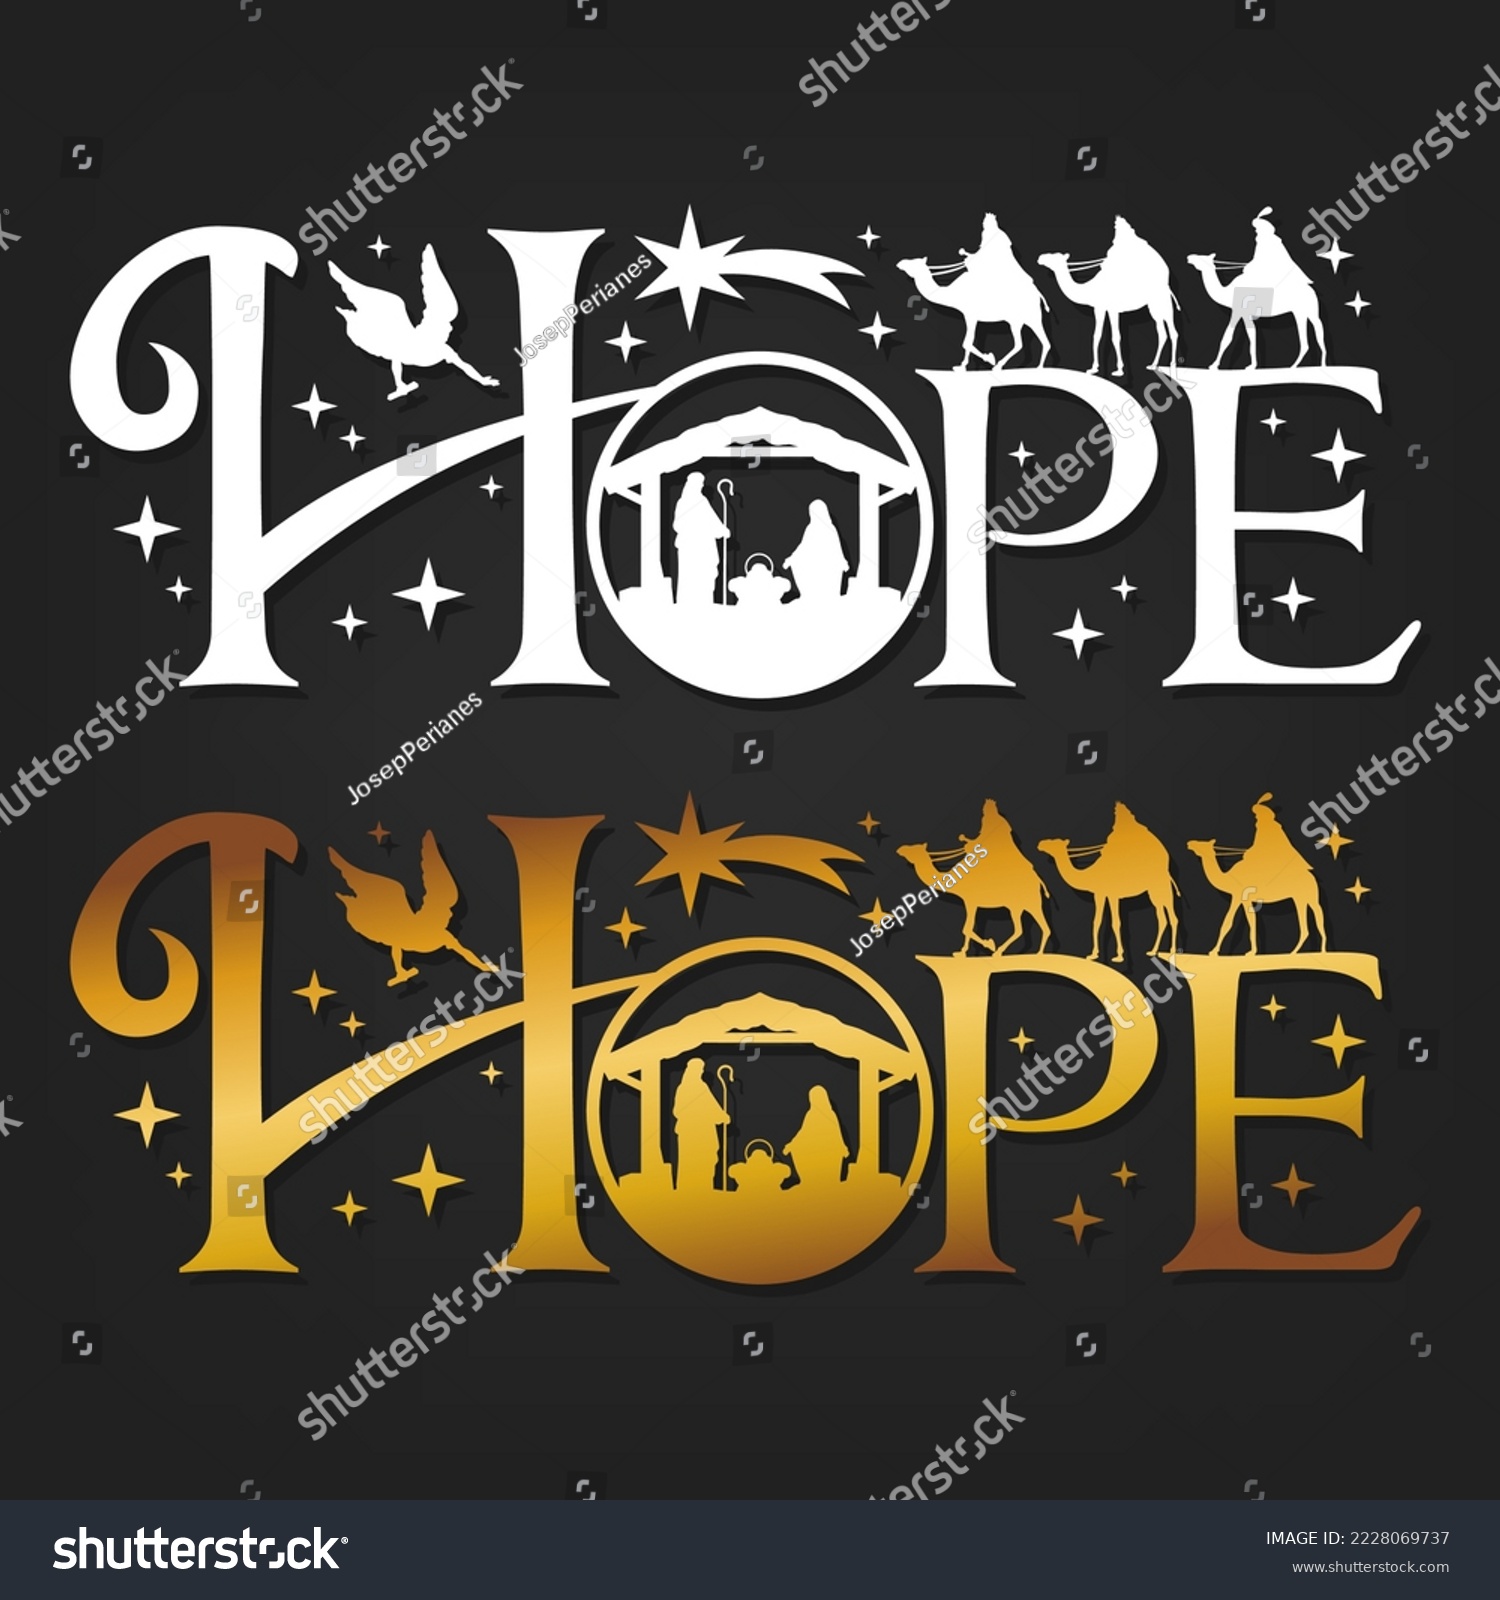 SVG of Hope Nativity Scene Silhouette. Holidays Christmas Religion. Holly Night Characters. Cut File Design. Vector Clip Art. svg